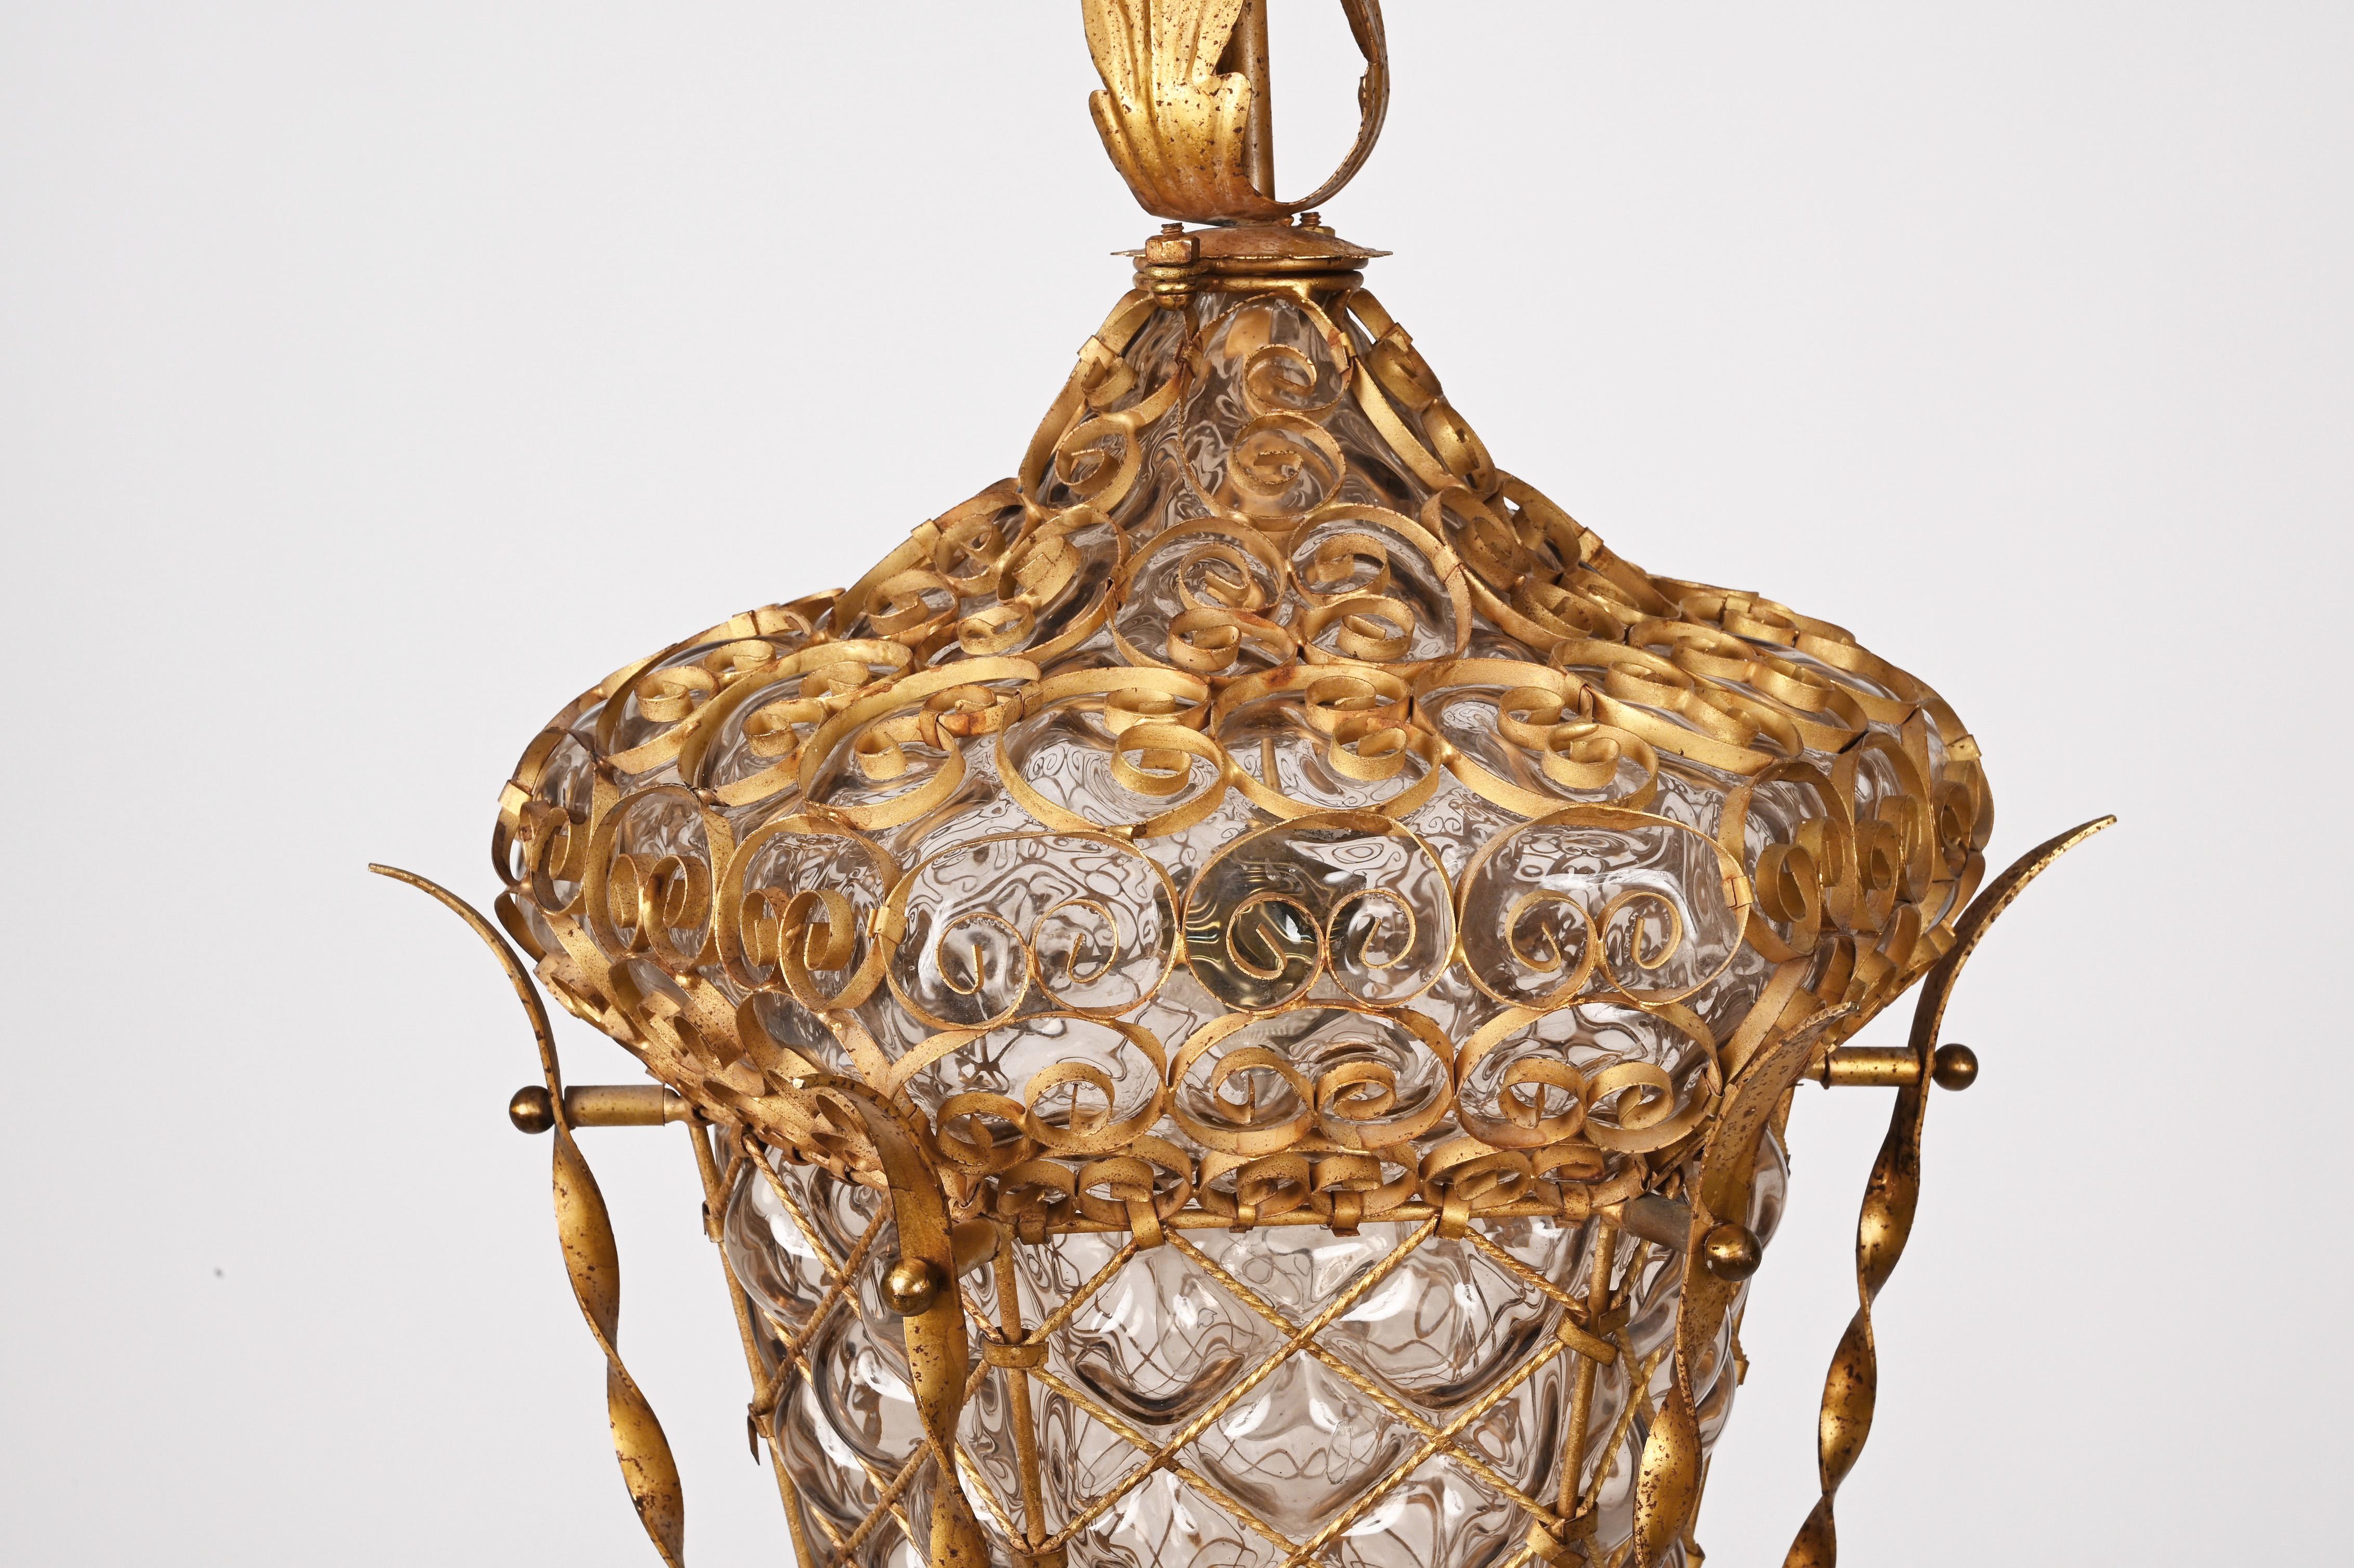 Midcentury Venetian Mouth Blown Glass in Gold Painted Metal Frame Lantern, 1940s For Sale 1